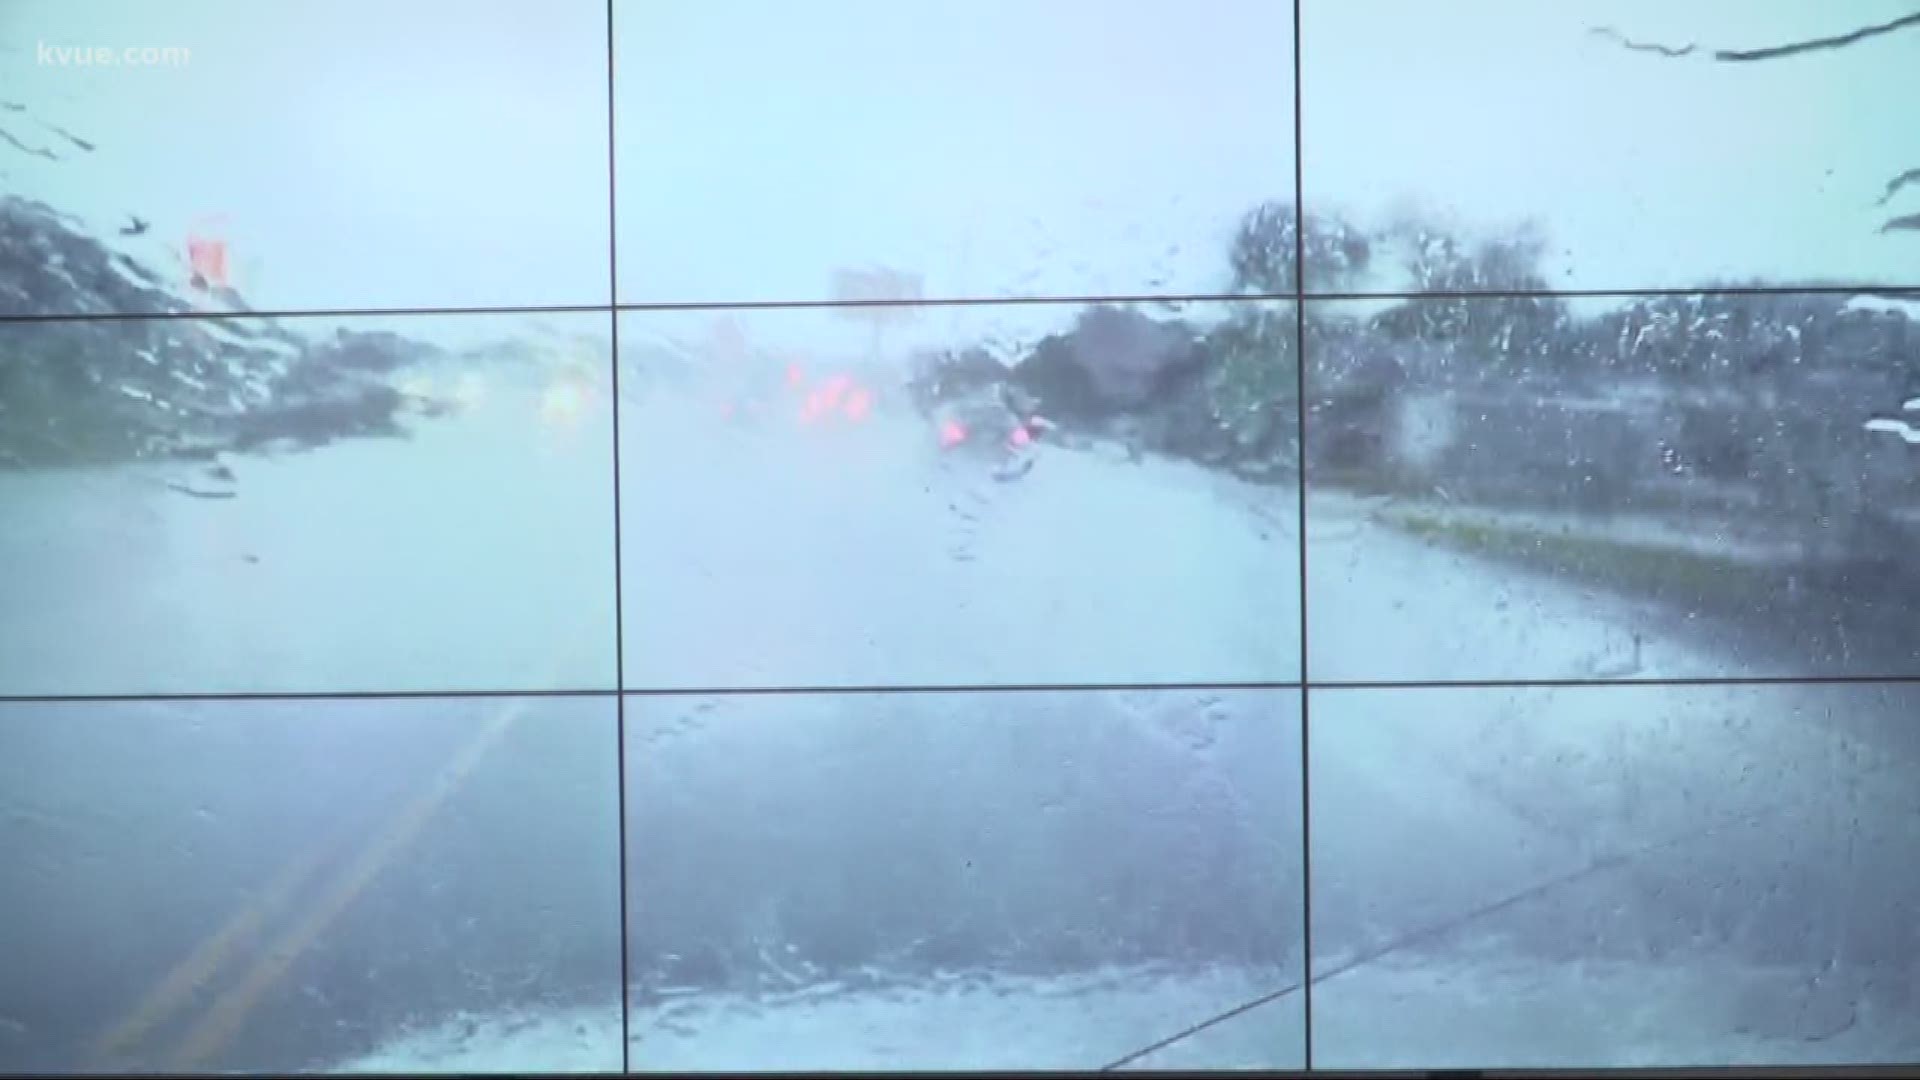 It's a running joke in Austin that people around here can't drive on wet or icy roads and a new report backs that up. The report ranked Austin near the bottom of the list for driving well in wet conditions.